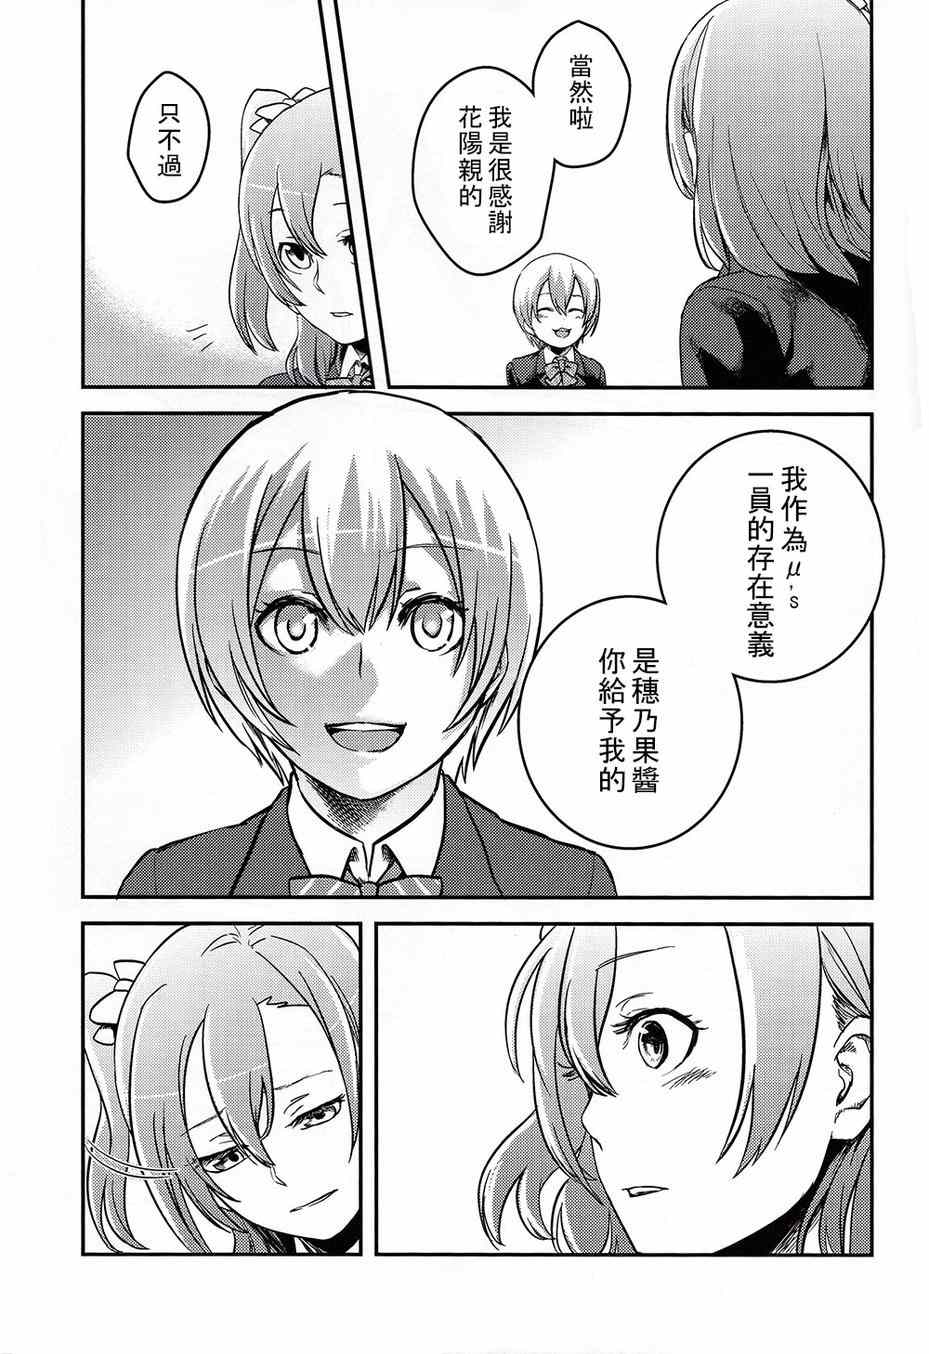 《LoveLive》漫画 LEADERS